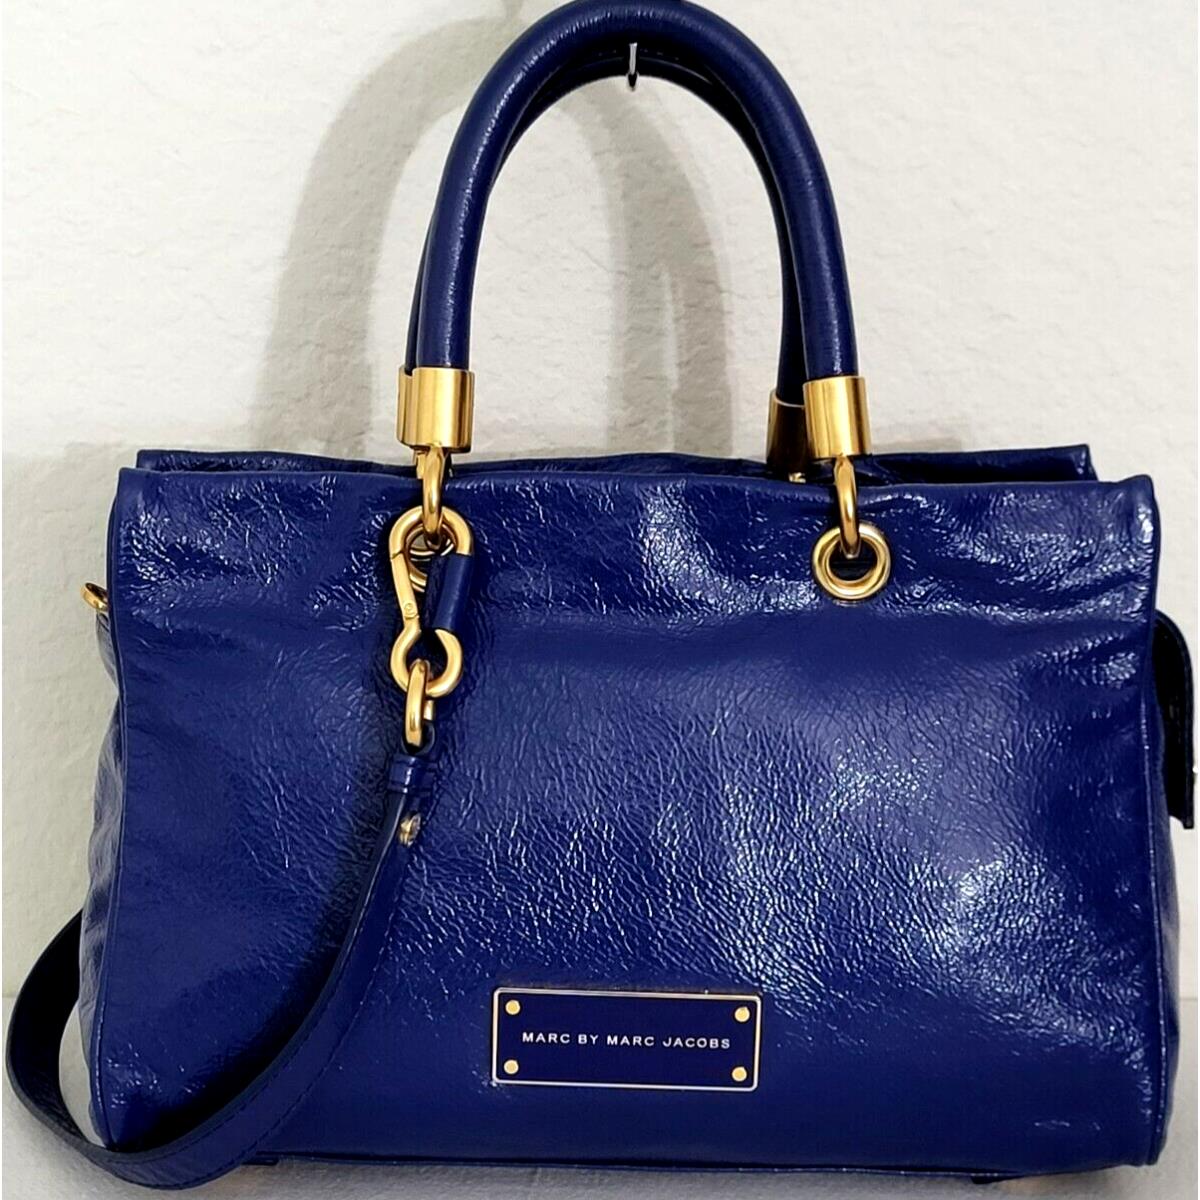 Marc Jacobs  bag  TOO HOT HANDLE - Blue Handle/Strap, Gold Hardware, BRIGHT ROYAL BLUE Exterior 0